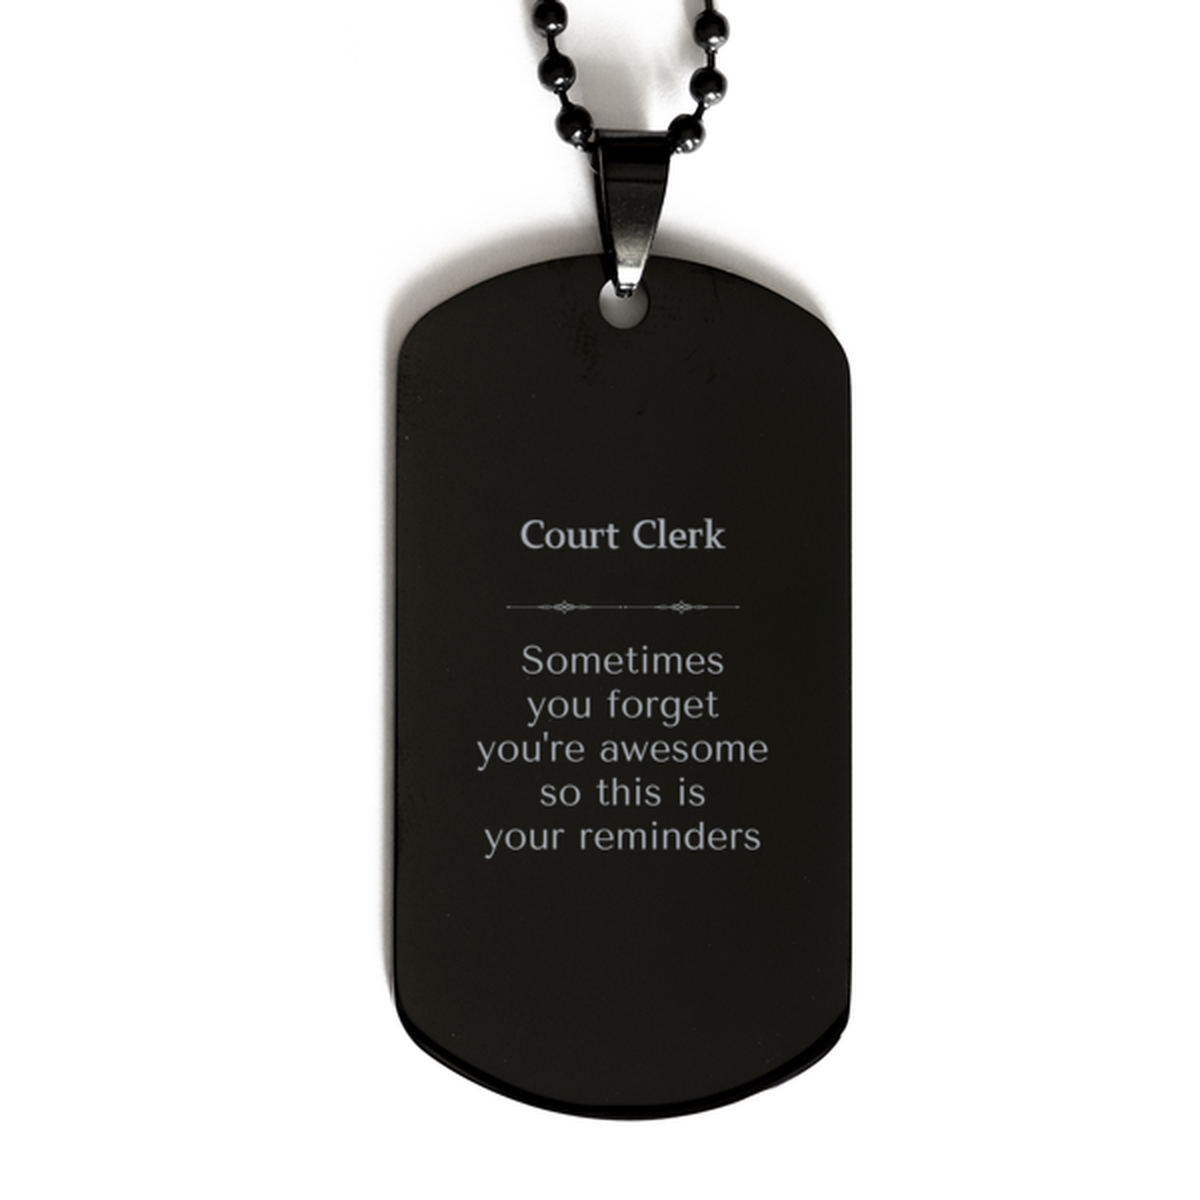 Sentimental Court Clerk Black Dog Tag, Court Clerk Sometimes you forget you're awesome so this is your reminders, Graduation Christmas Birthday Gifts for Court Clerk, Men, Women, Coworkers